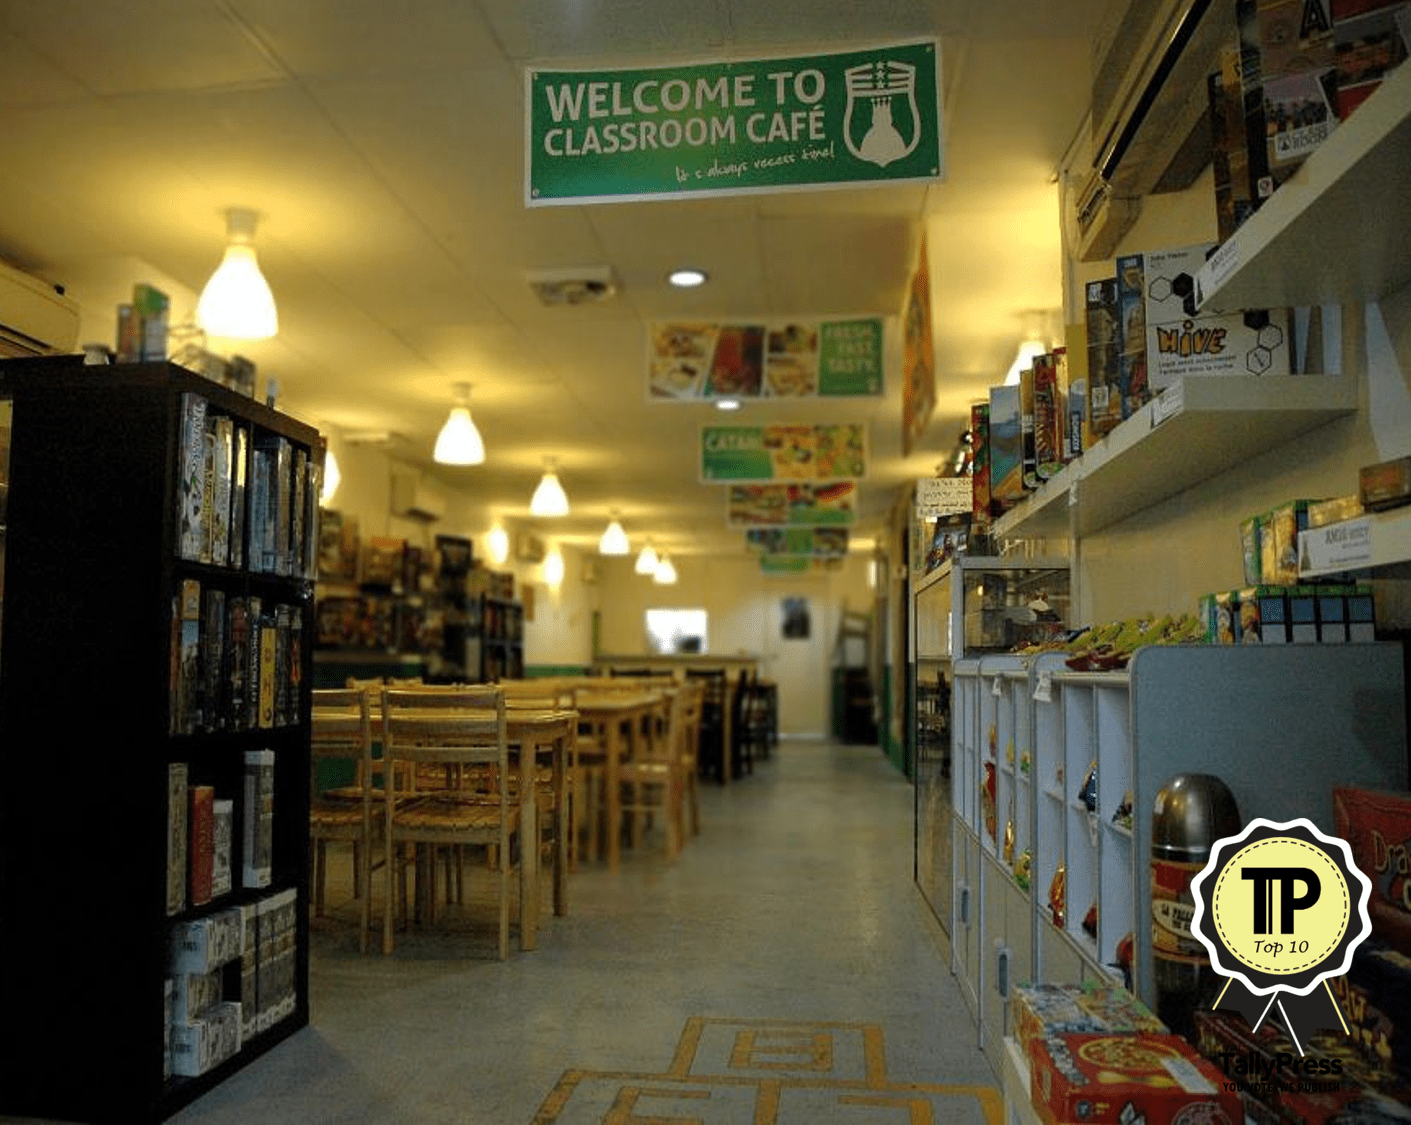 malaysias-top-10-board-game-cafes-classroom-cafe